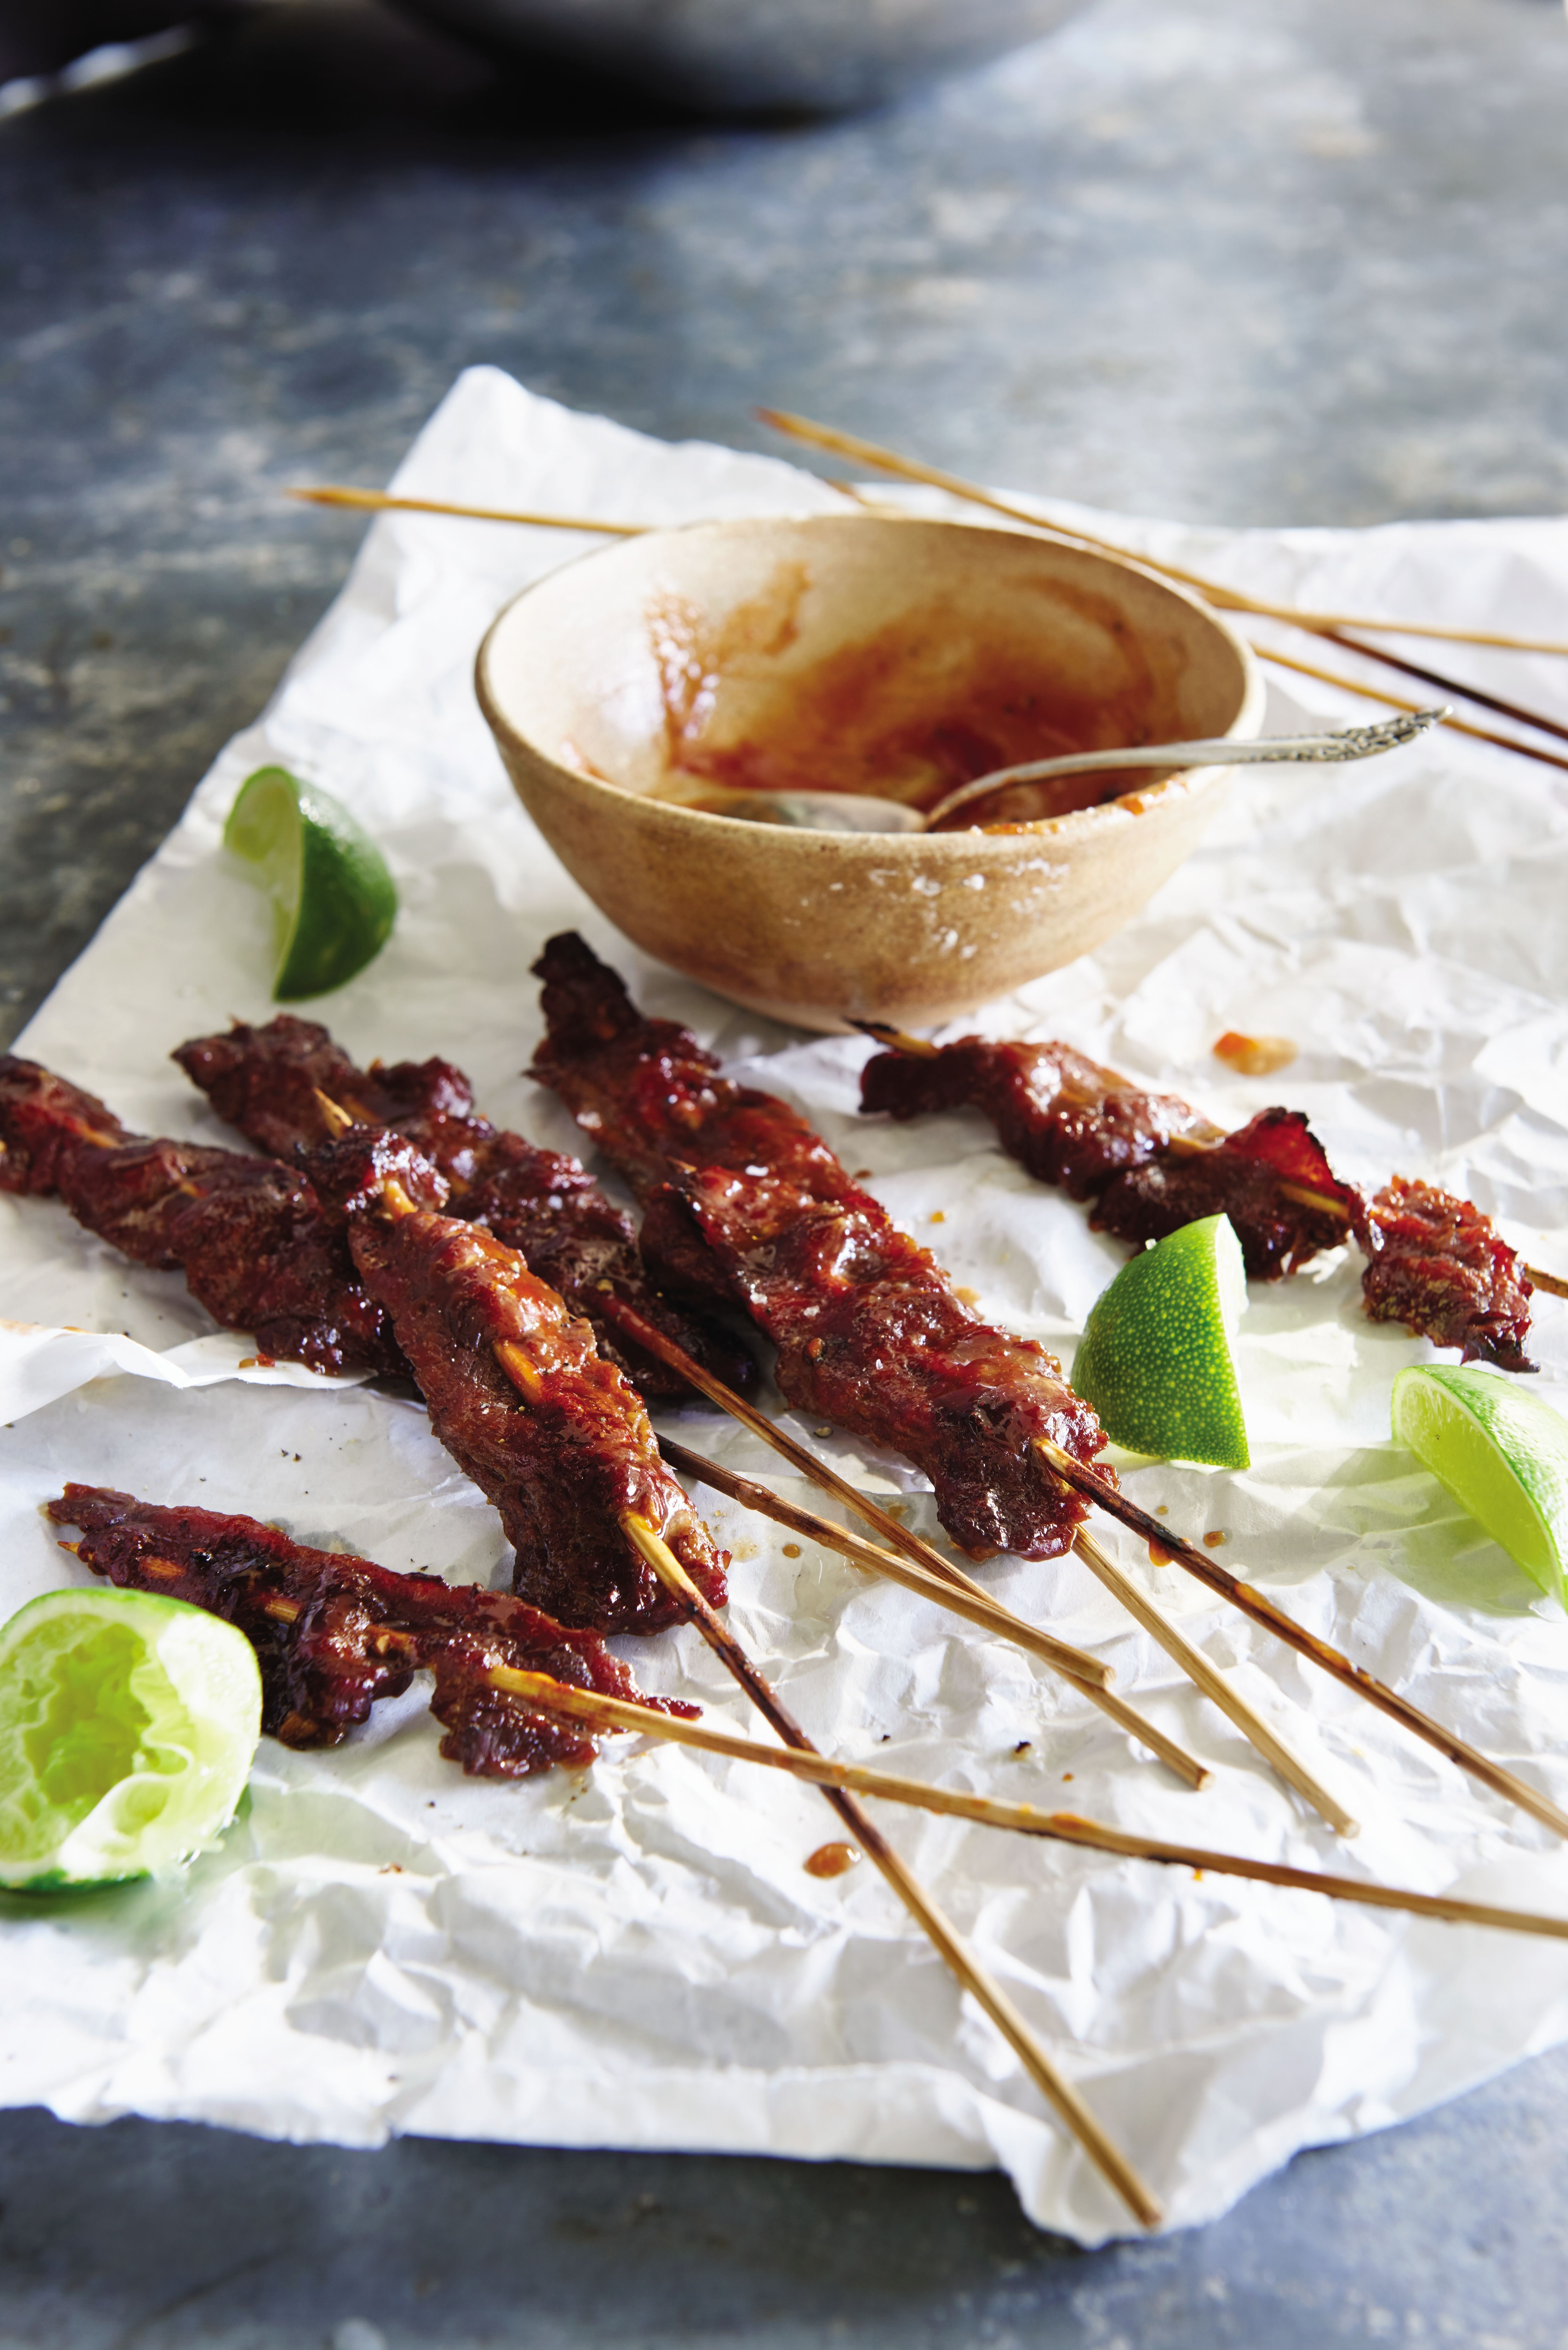 Almost Mongolian Beef Satay from Daphne Oz's 'The Happy Cook'